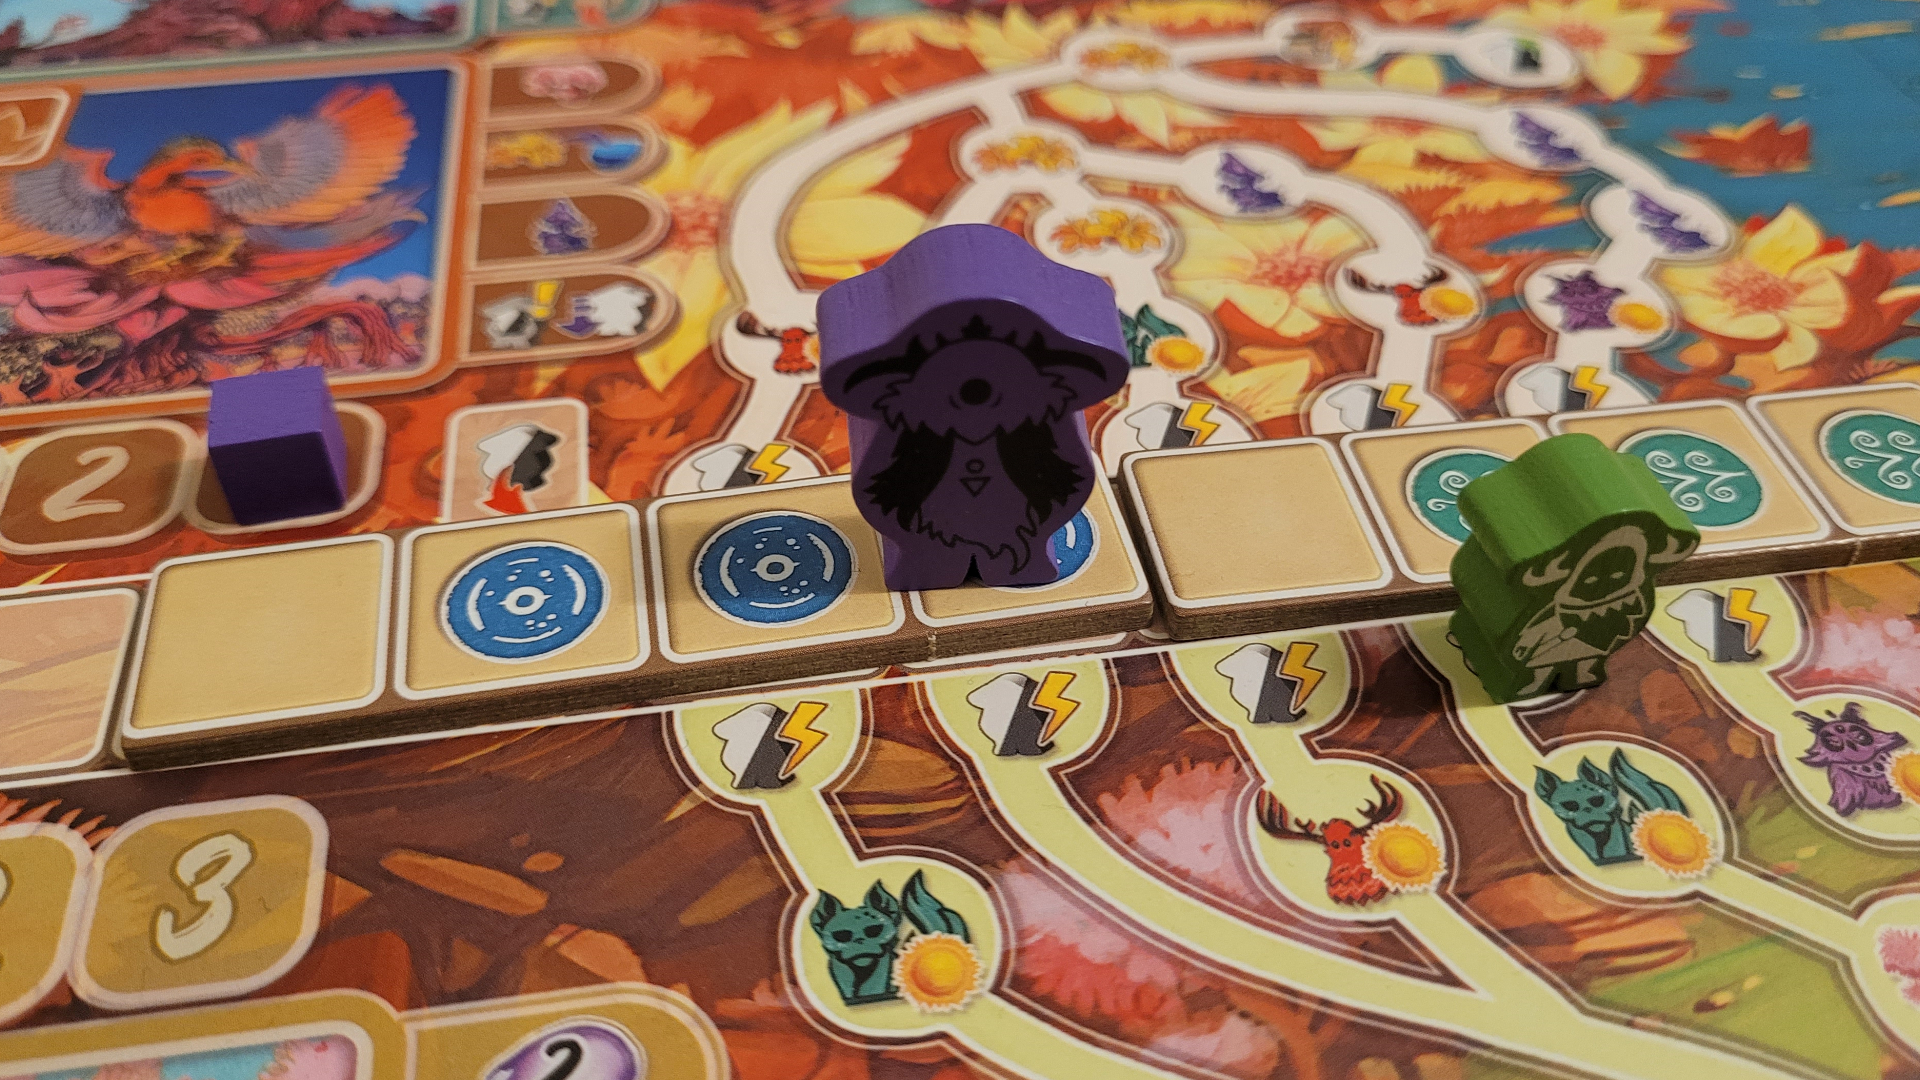 Colorful wooden meeples on the Arborea board